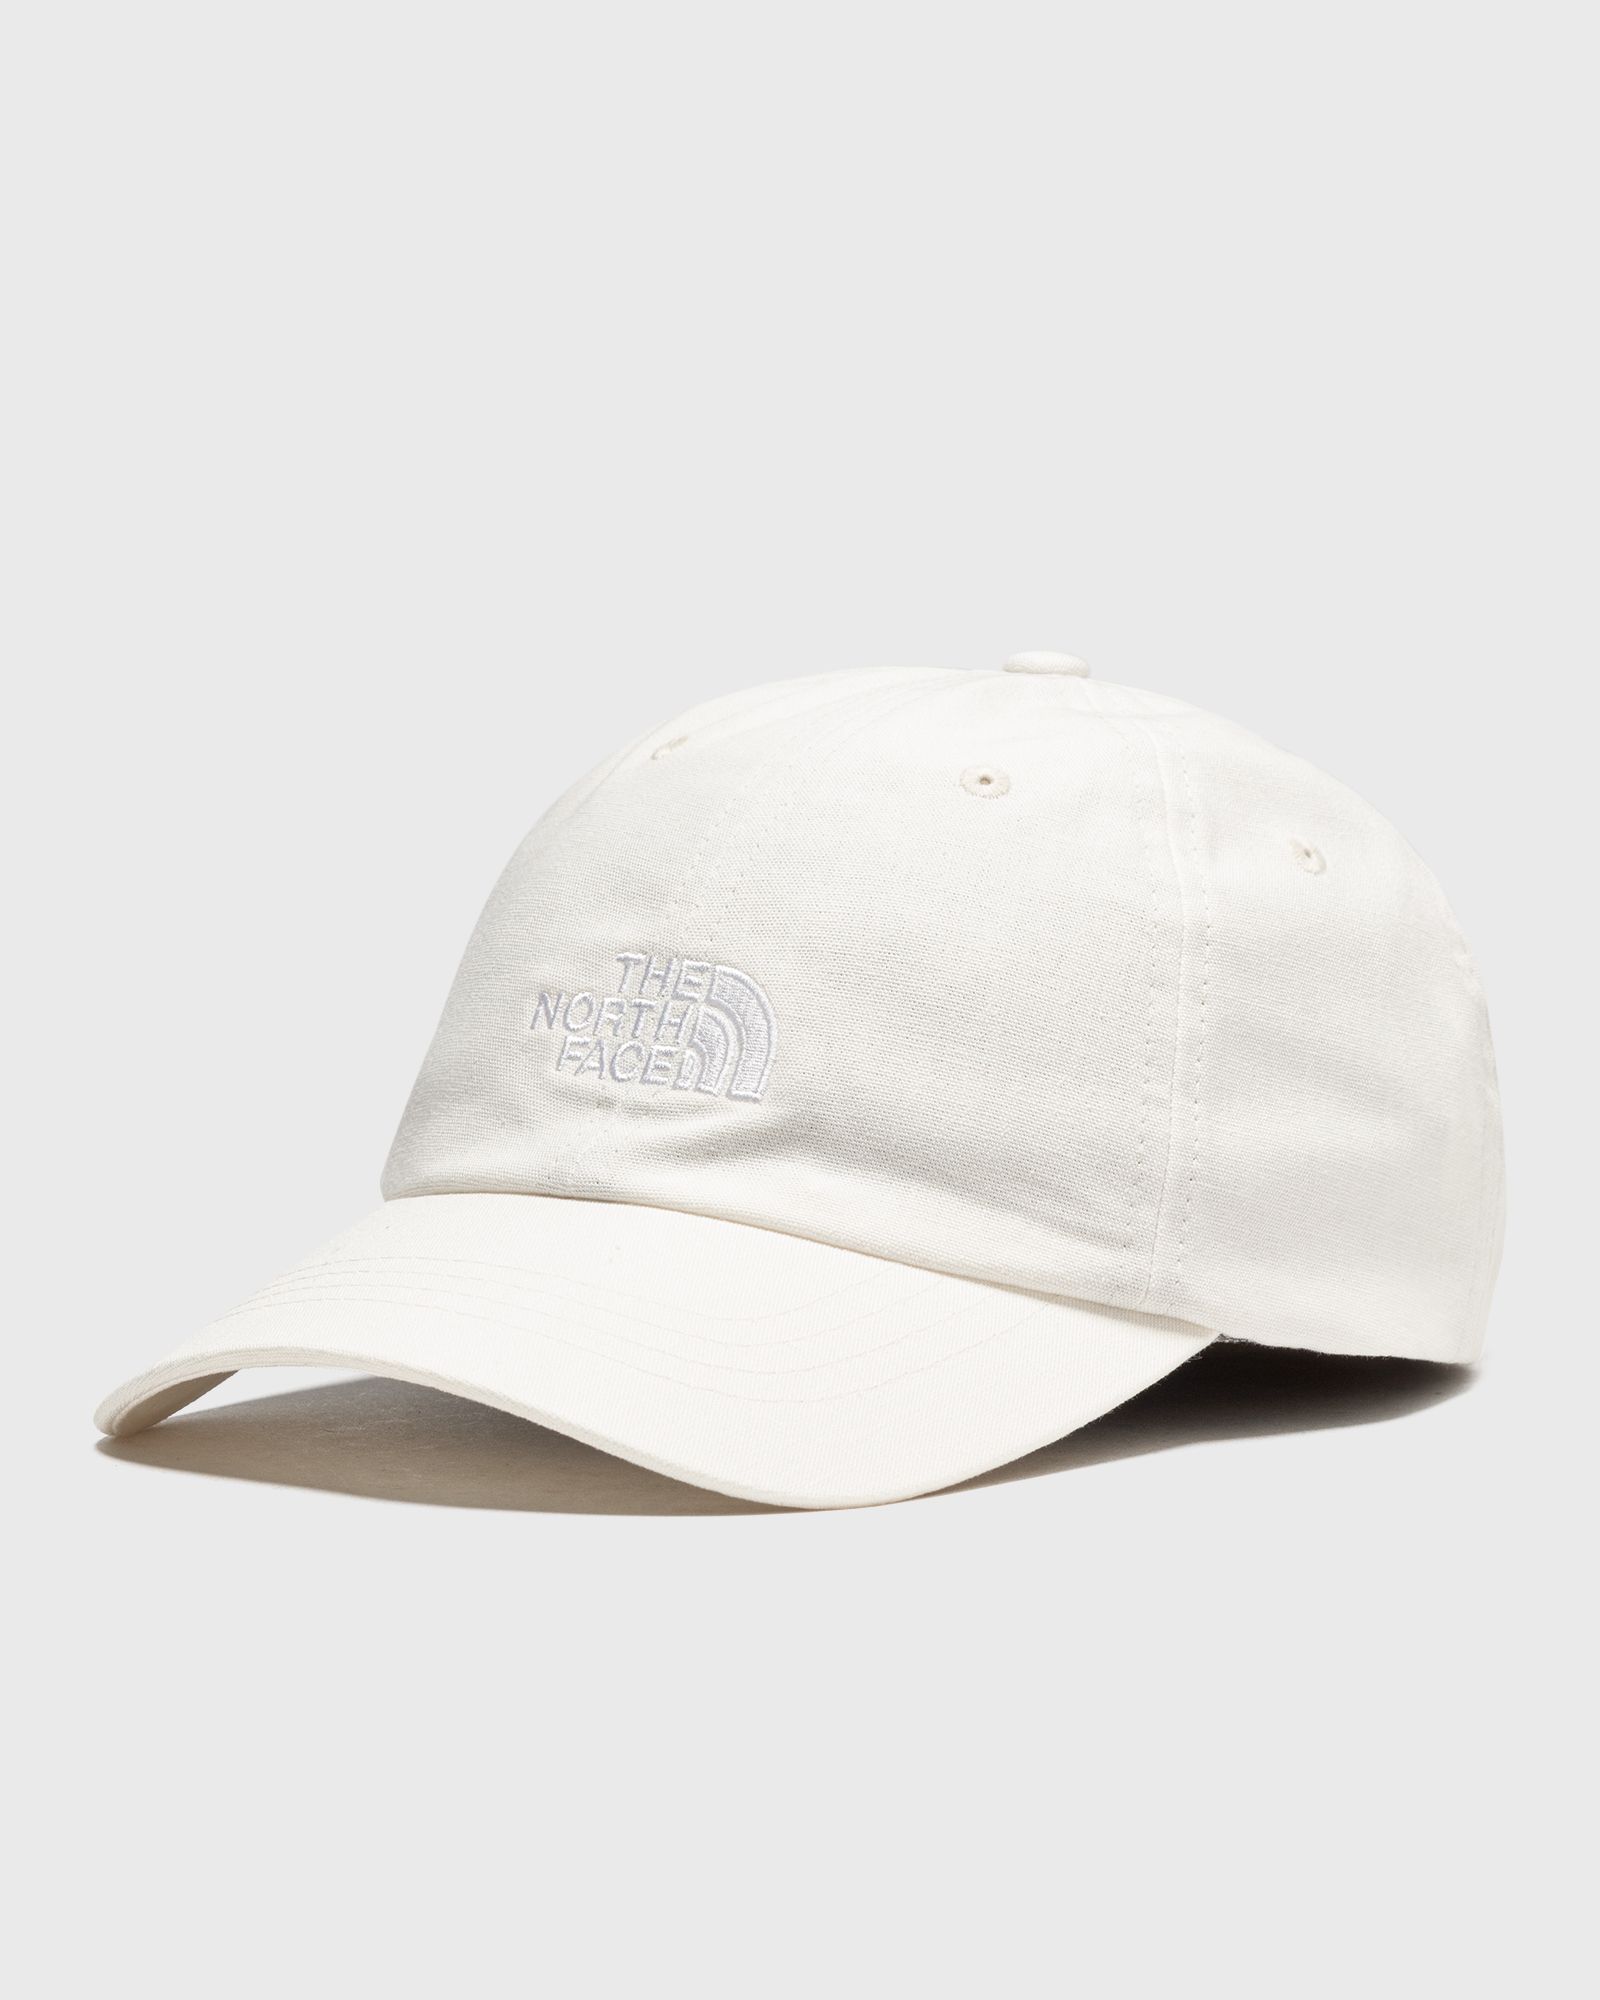 The North Face - norm hat men caps white in größe:one size